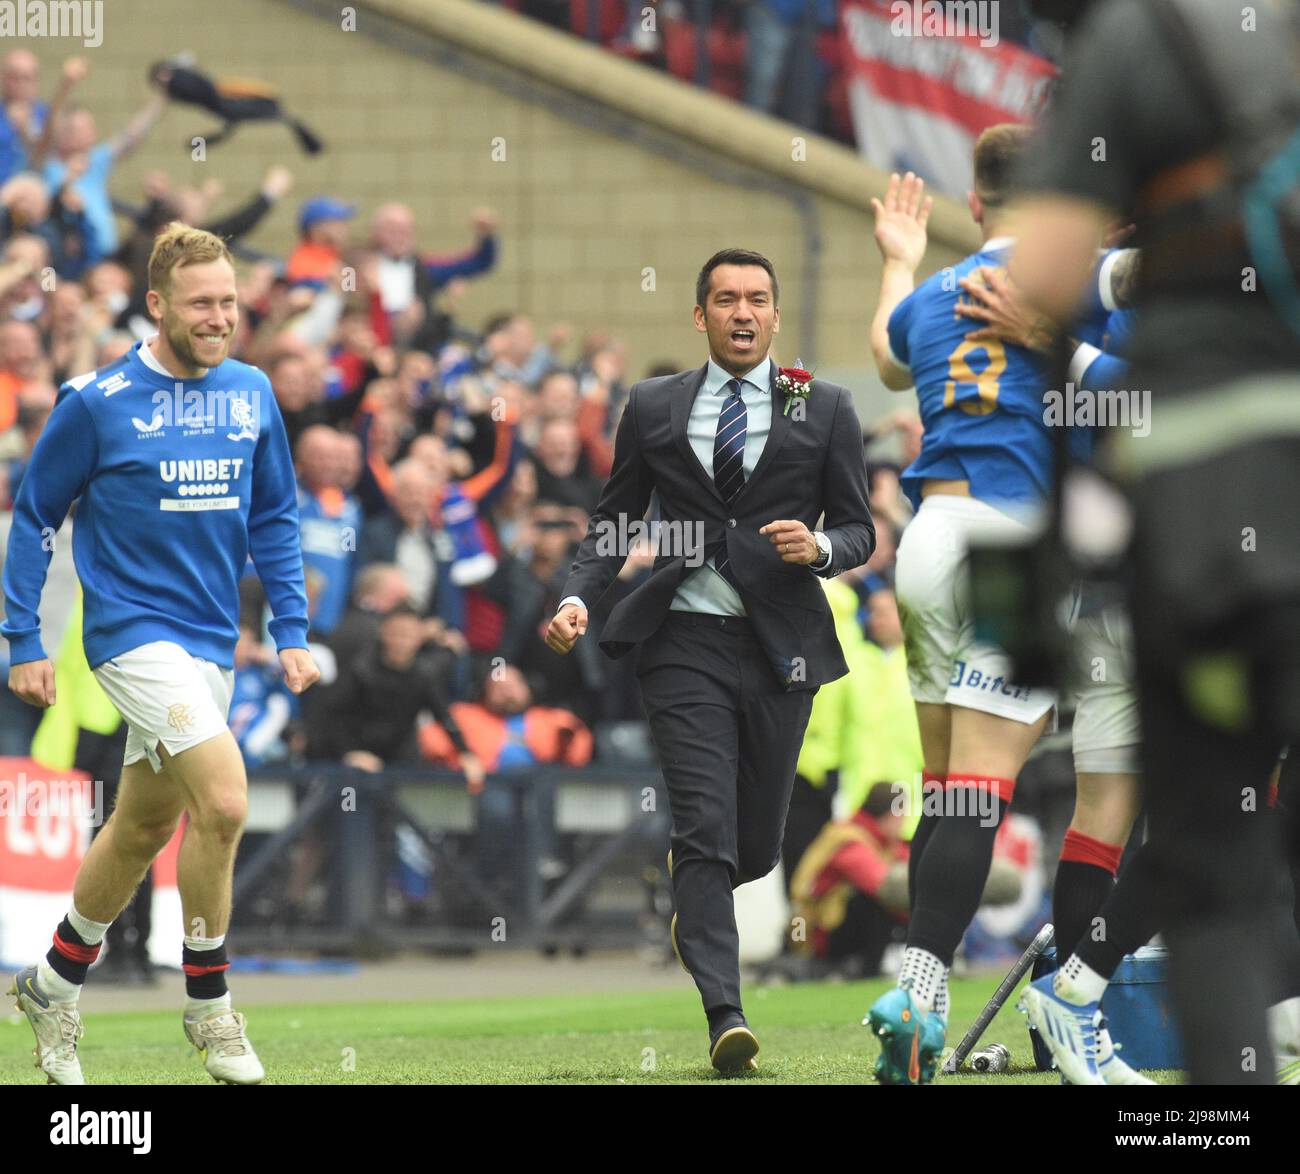 Hampden Park.Glasgow.Scotland, UK. 21st May, 2022. Rangers vs Heart of Midlothian. Scottish Cup Final 2022 Giovanni van Bronckhorst, manager of Rangers FC runs in to join the celebrations after 2nd Goal vs Hearts. Credit: eric mccowat/Alamy Live News Stock Photo